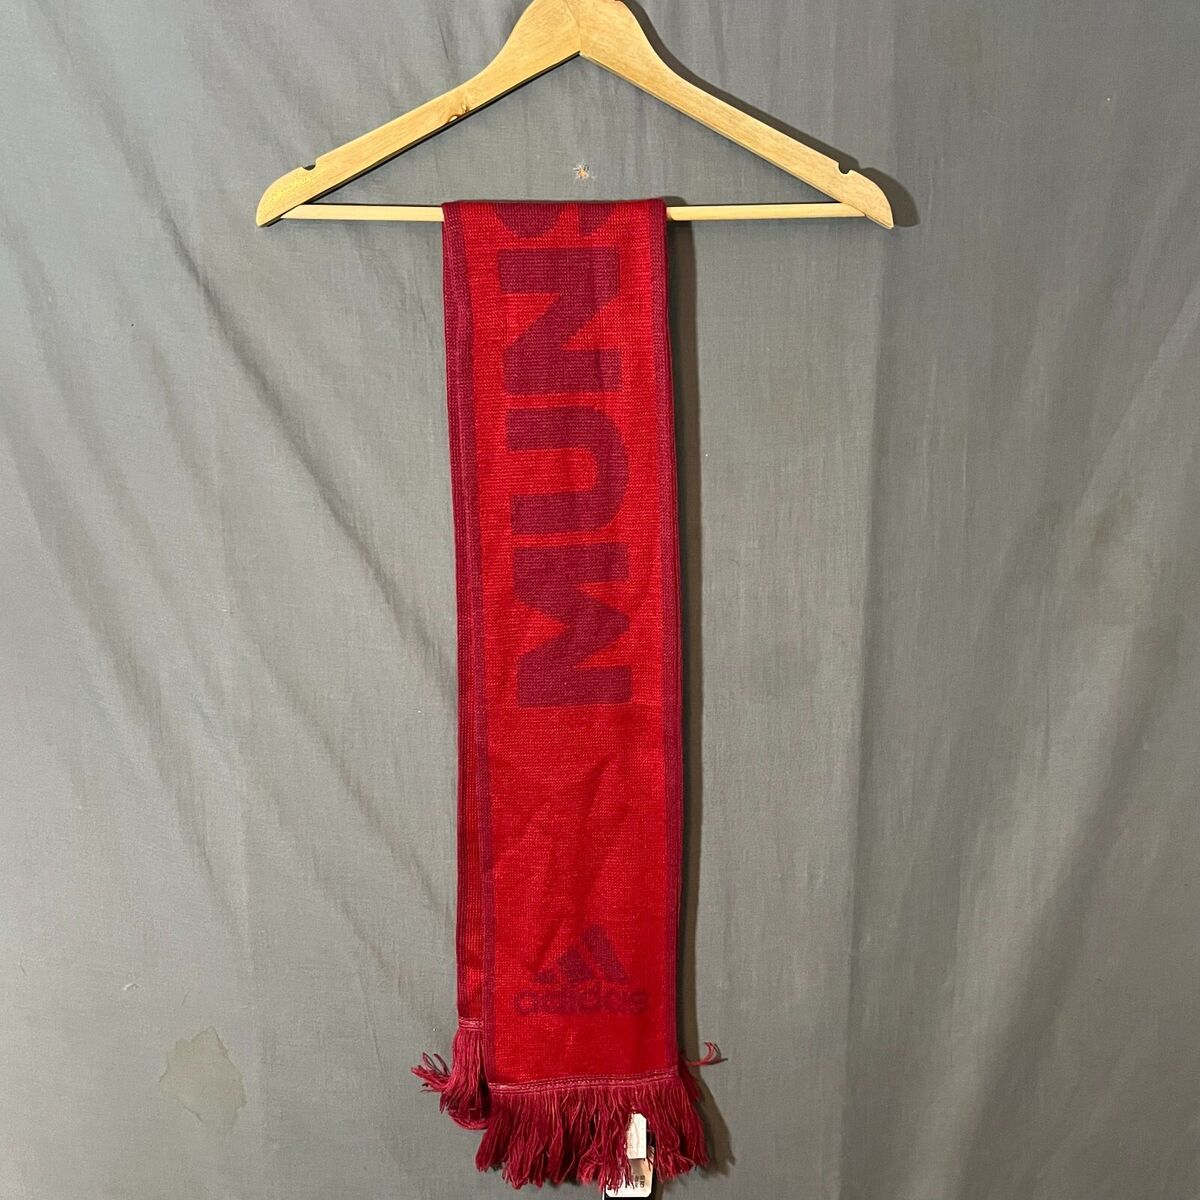 New ADIDAS Scarf Red Munster Sports Unisex RRP £20